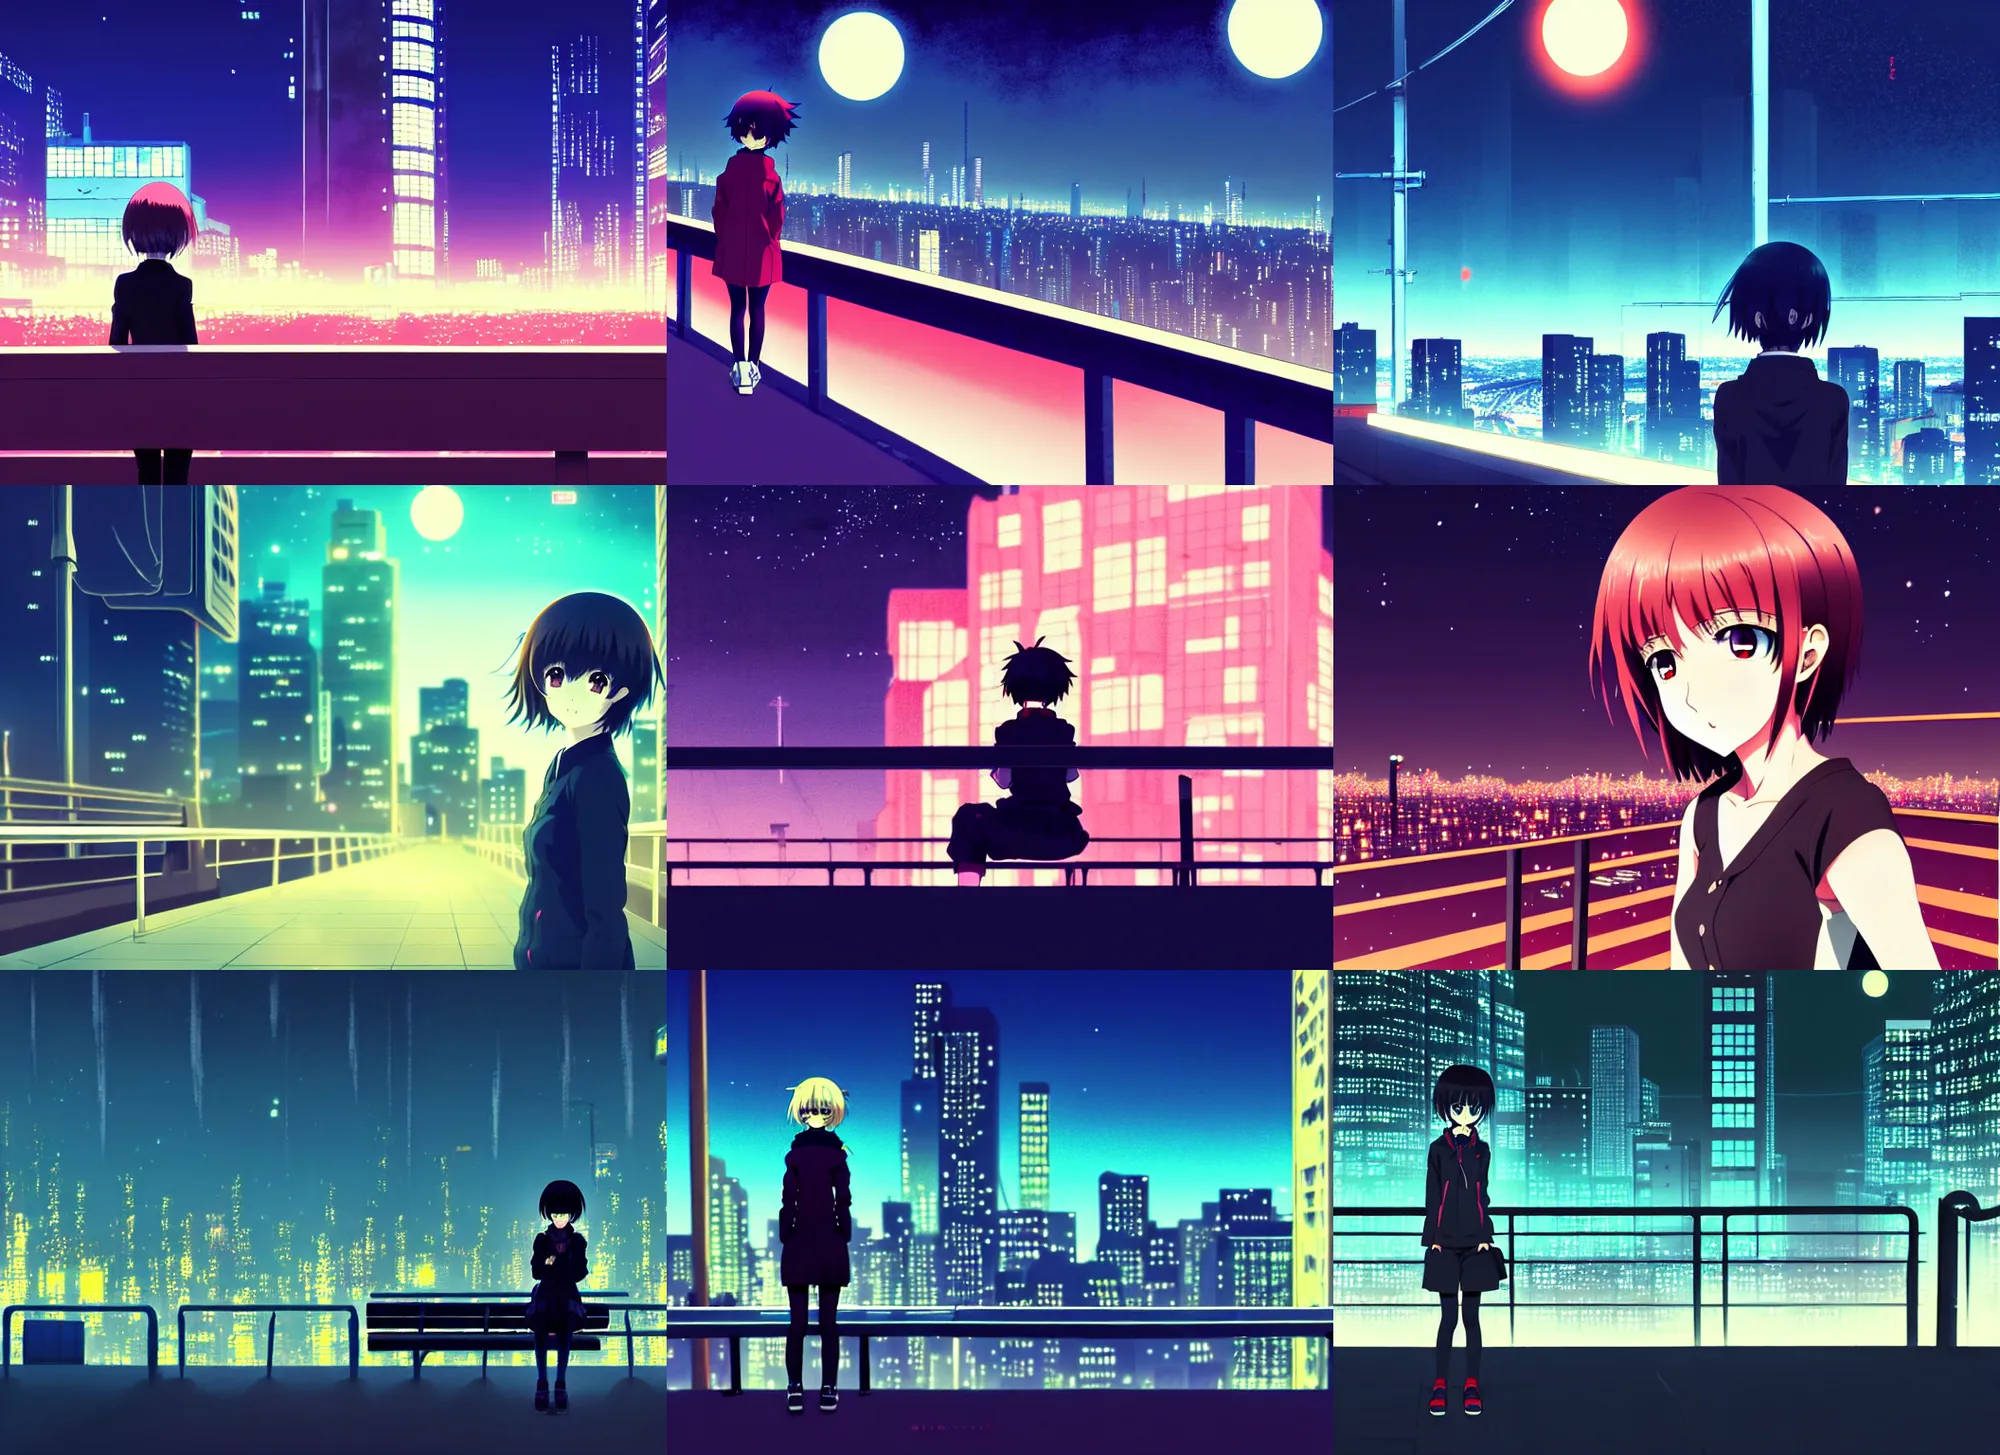 Prompt: anime frames, anime visual, portrait of a young female traveler sight seeing above the city exterior at night, bench, guardrails, very low light, cute face by ilya kuvshinov and, psycho pass, kyoani, dynamic pose, dynamic perspective, strong silhouette, anime cels, rounded eyes, yoshinari yoh